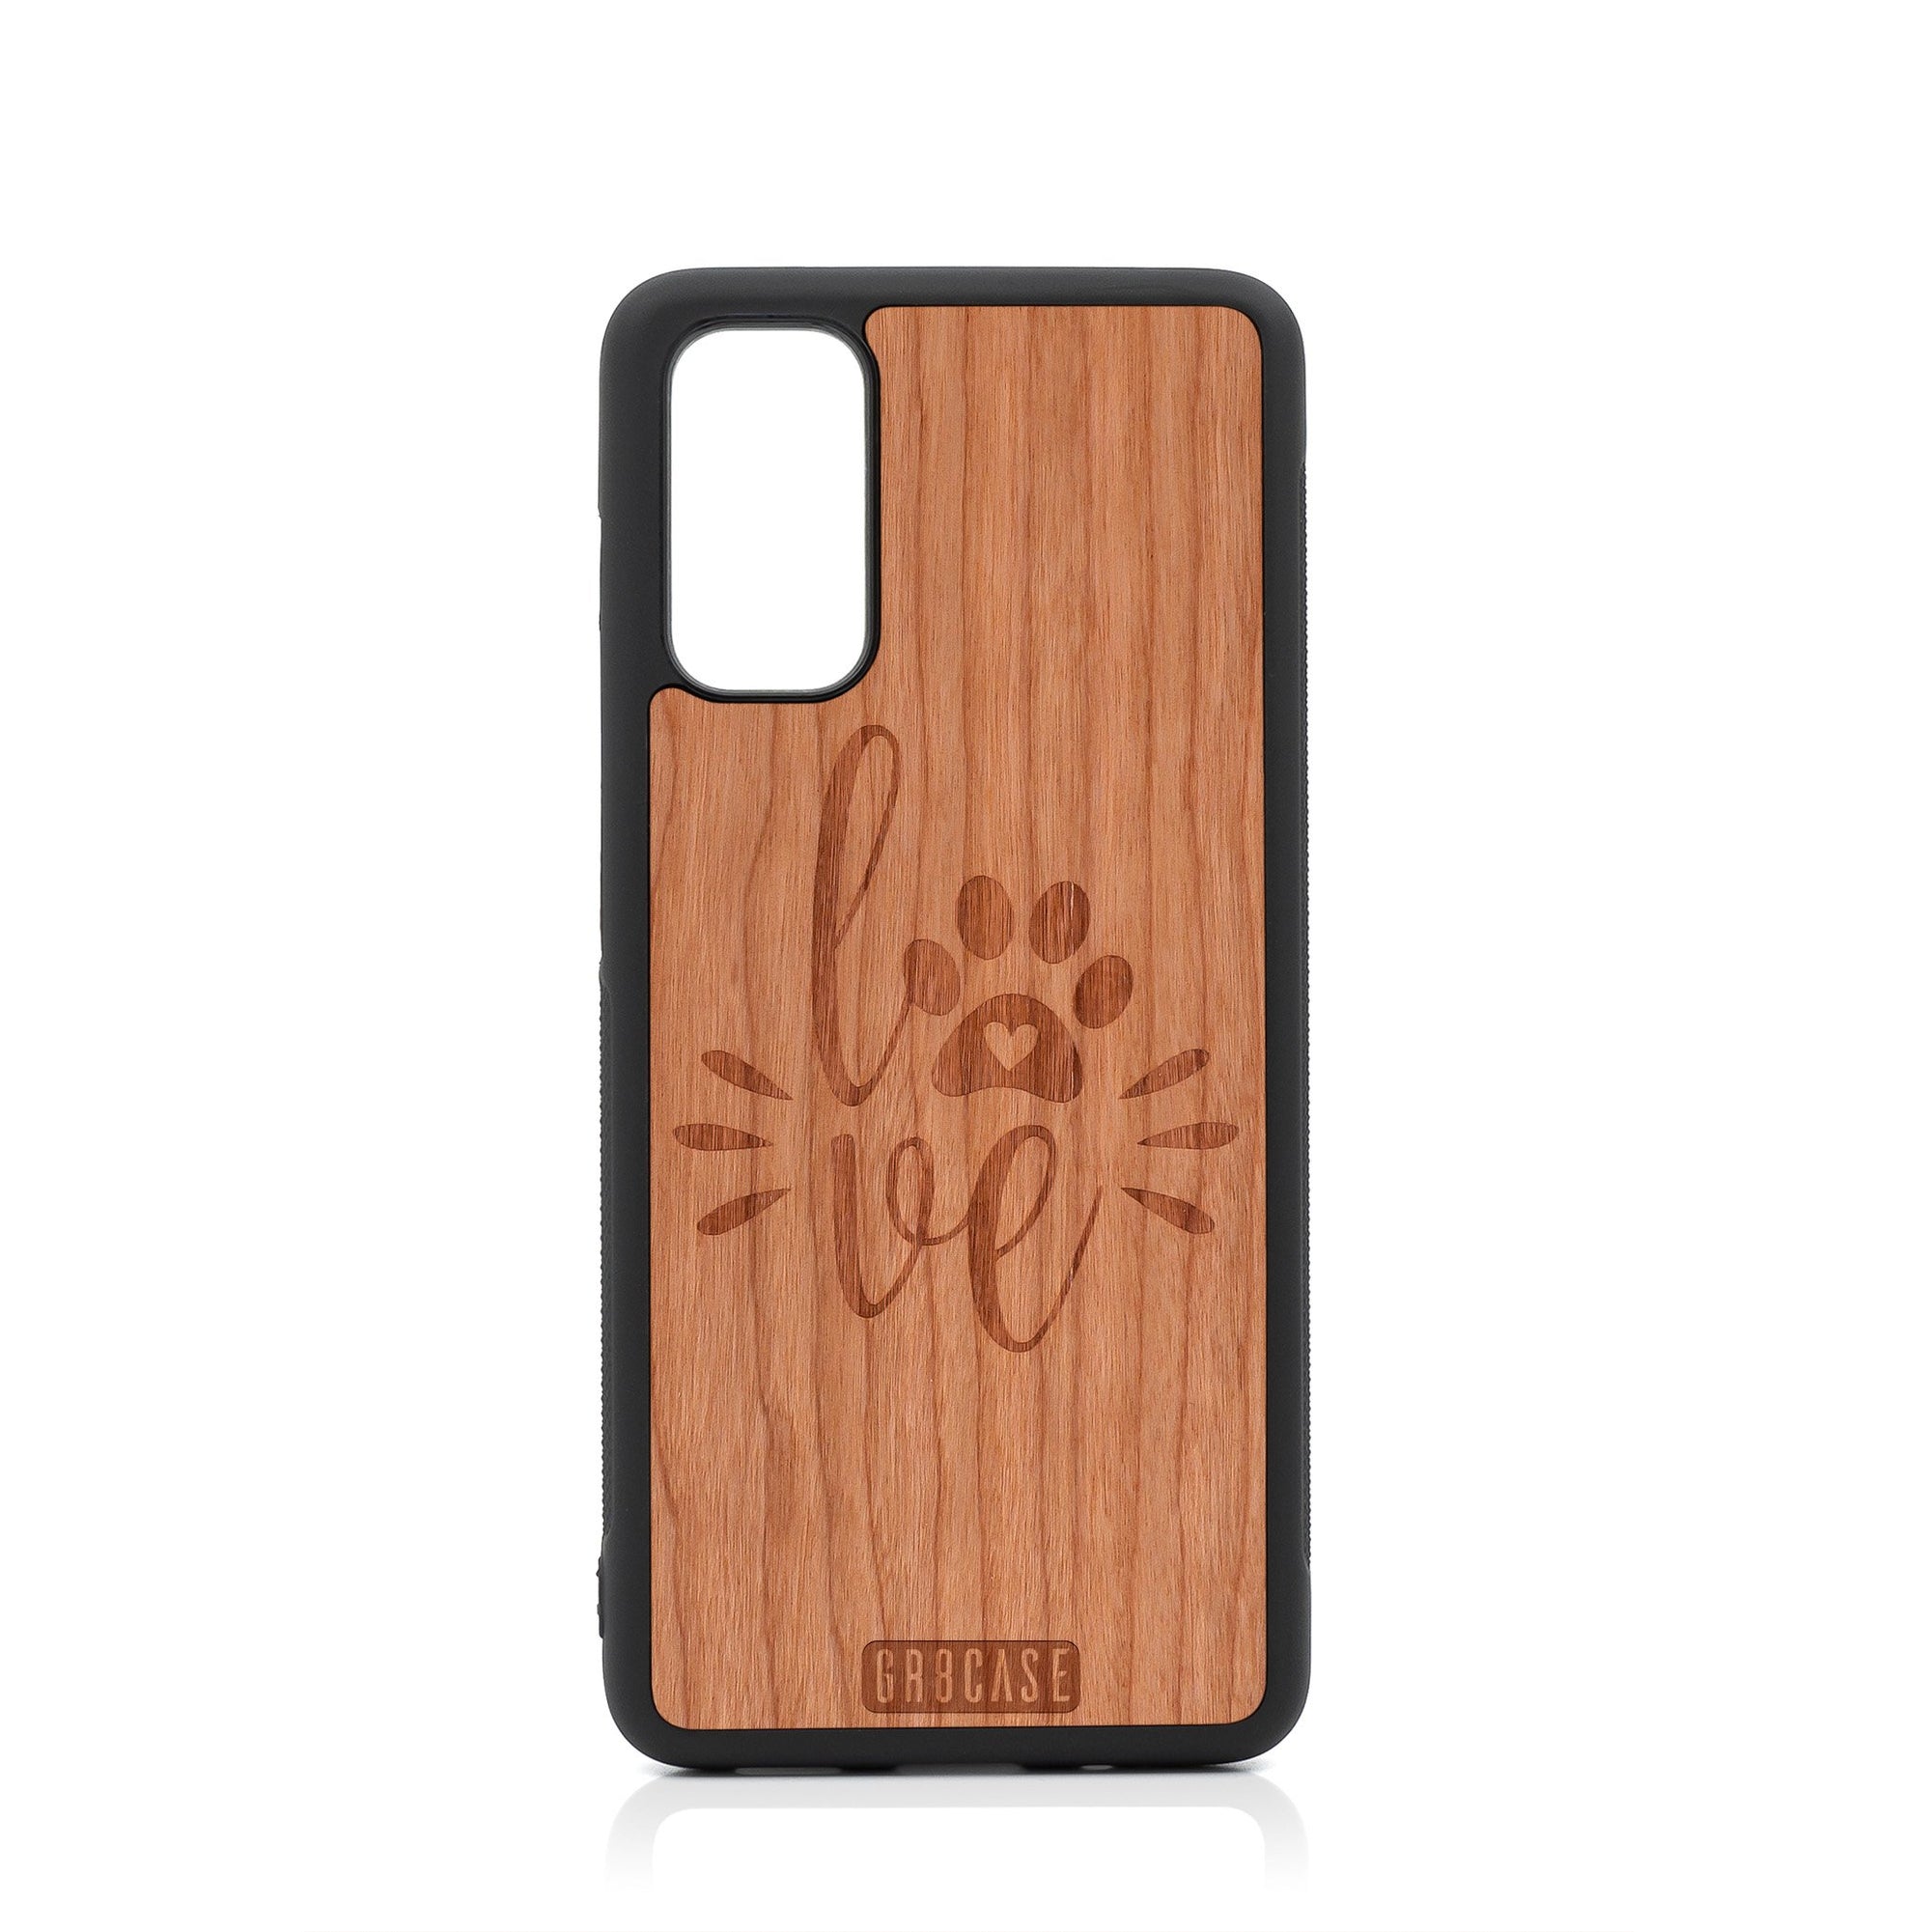 Paw Love Design Wood Case For Samsung Galaxy S20 FE 5G by GR8CASE